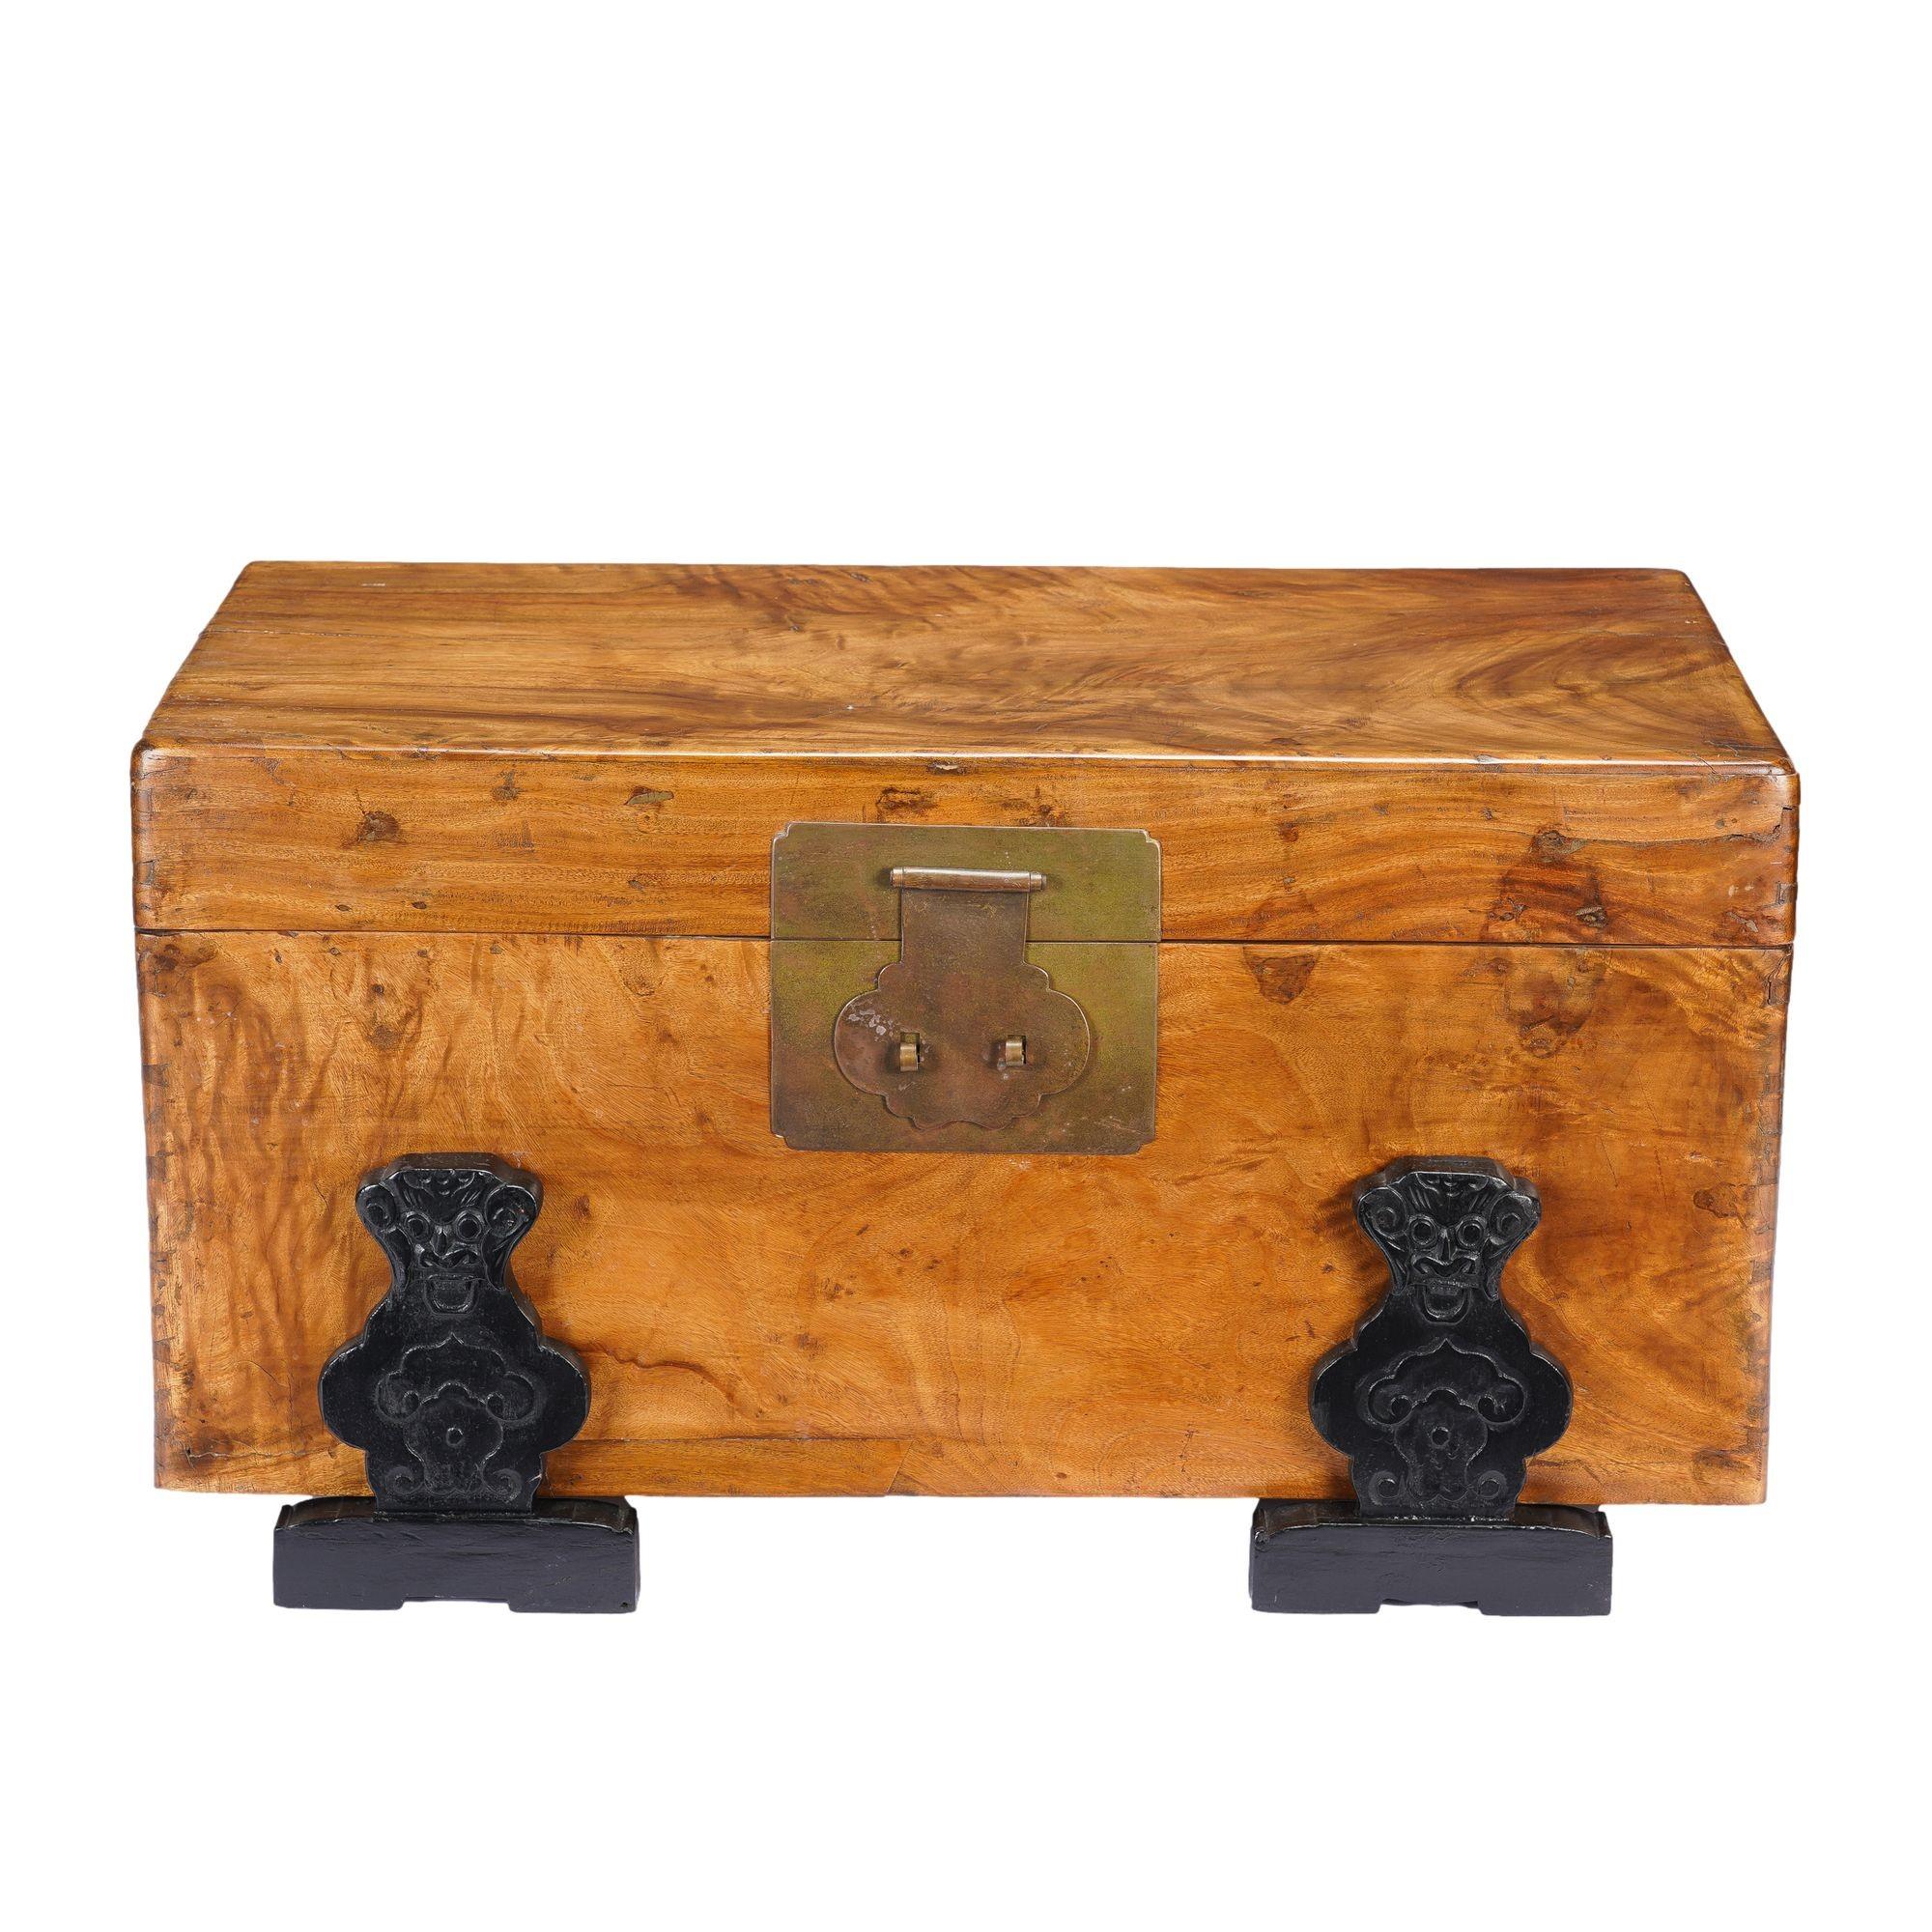 This camphor wood trunk exhibits elegant figuring, brass hardware, and rests on an ebonized hardwood stand with hand carved detailing.
China, made for the Western trade, circa 1820.